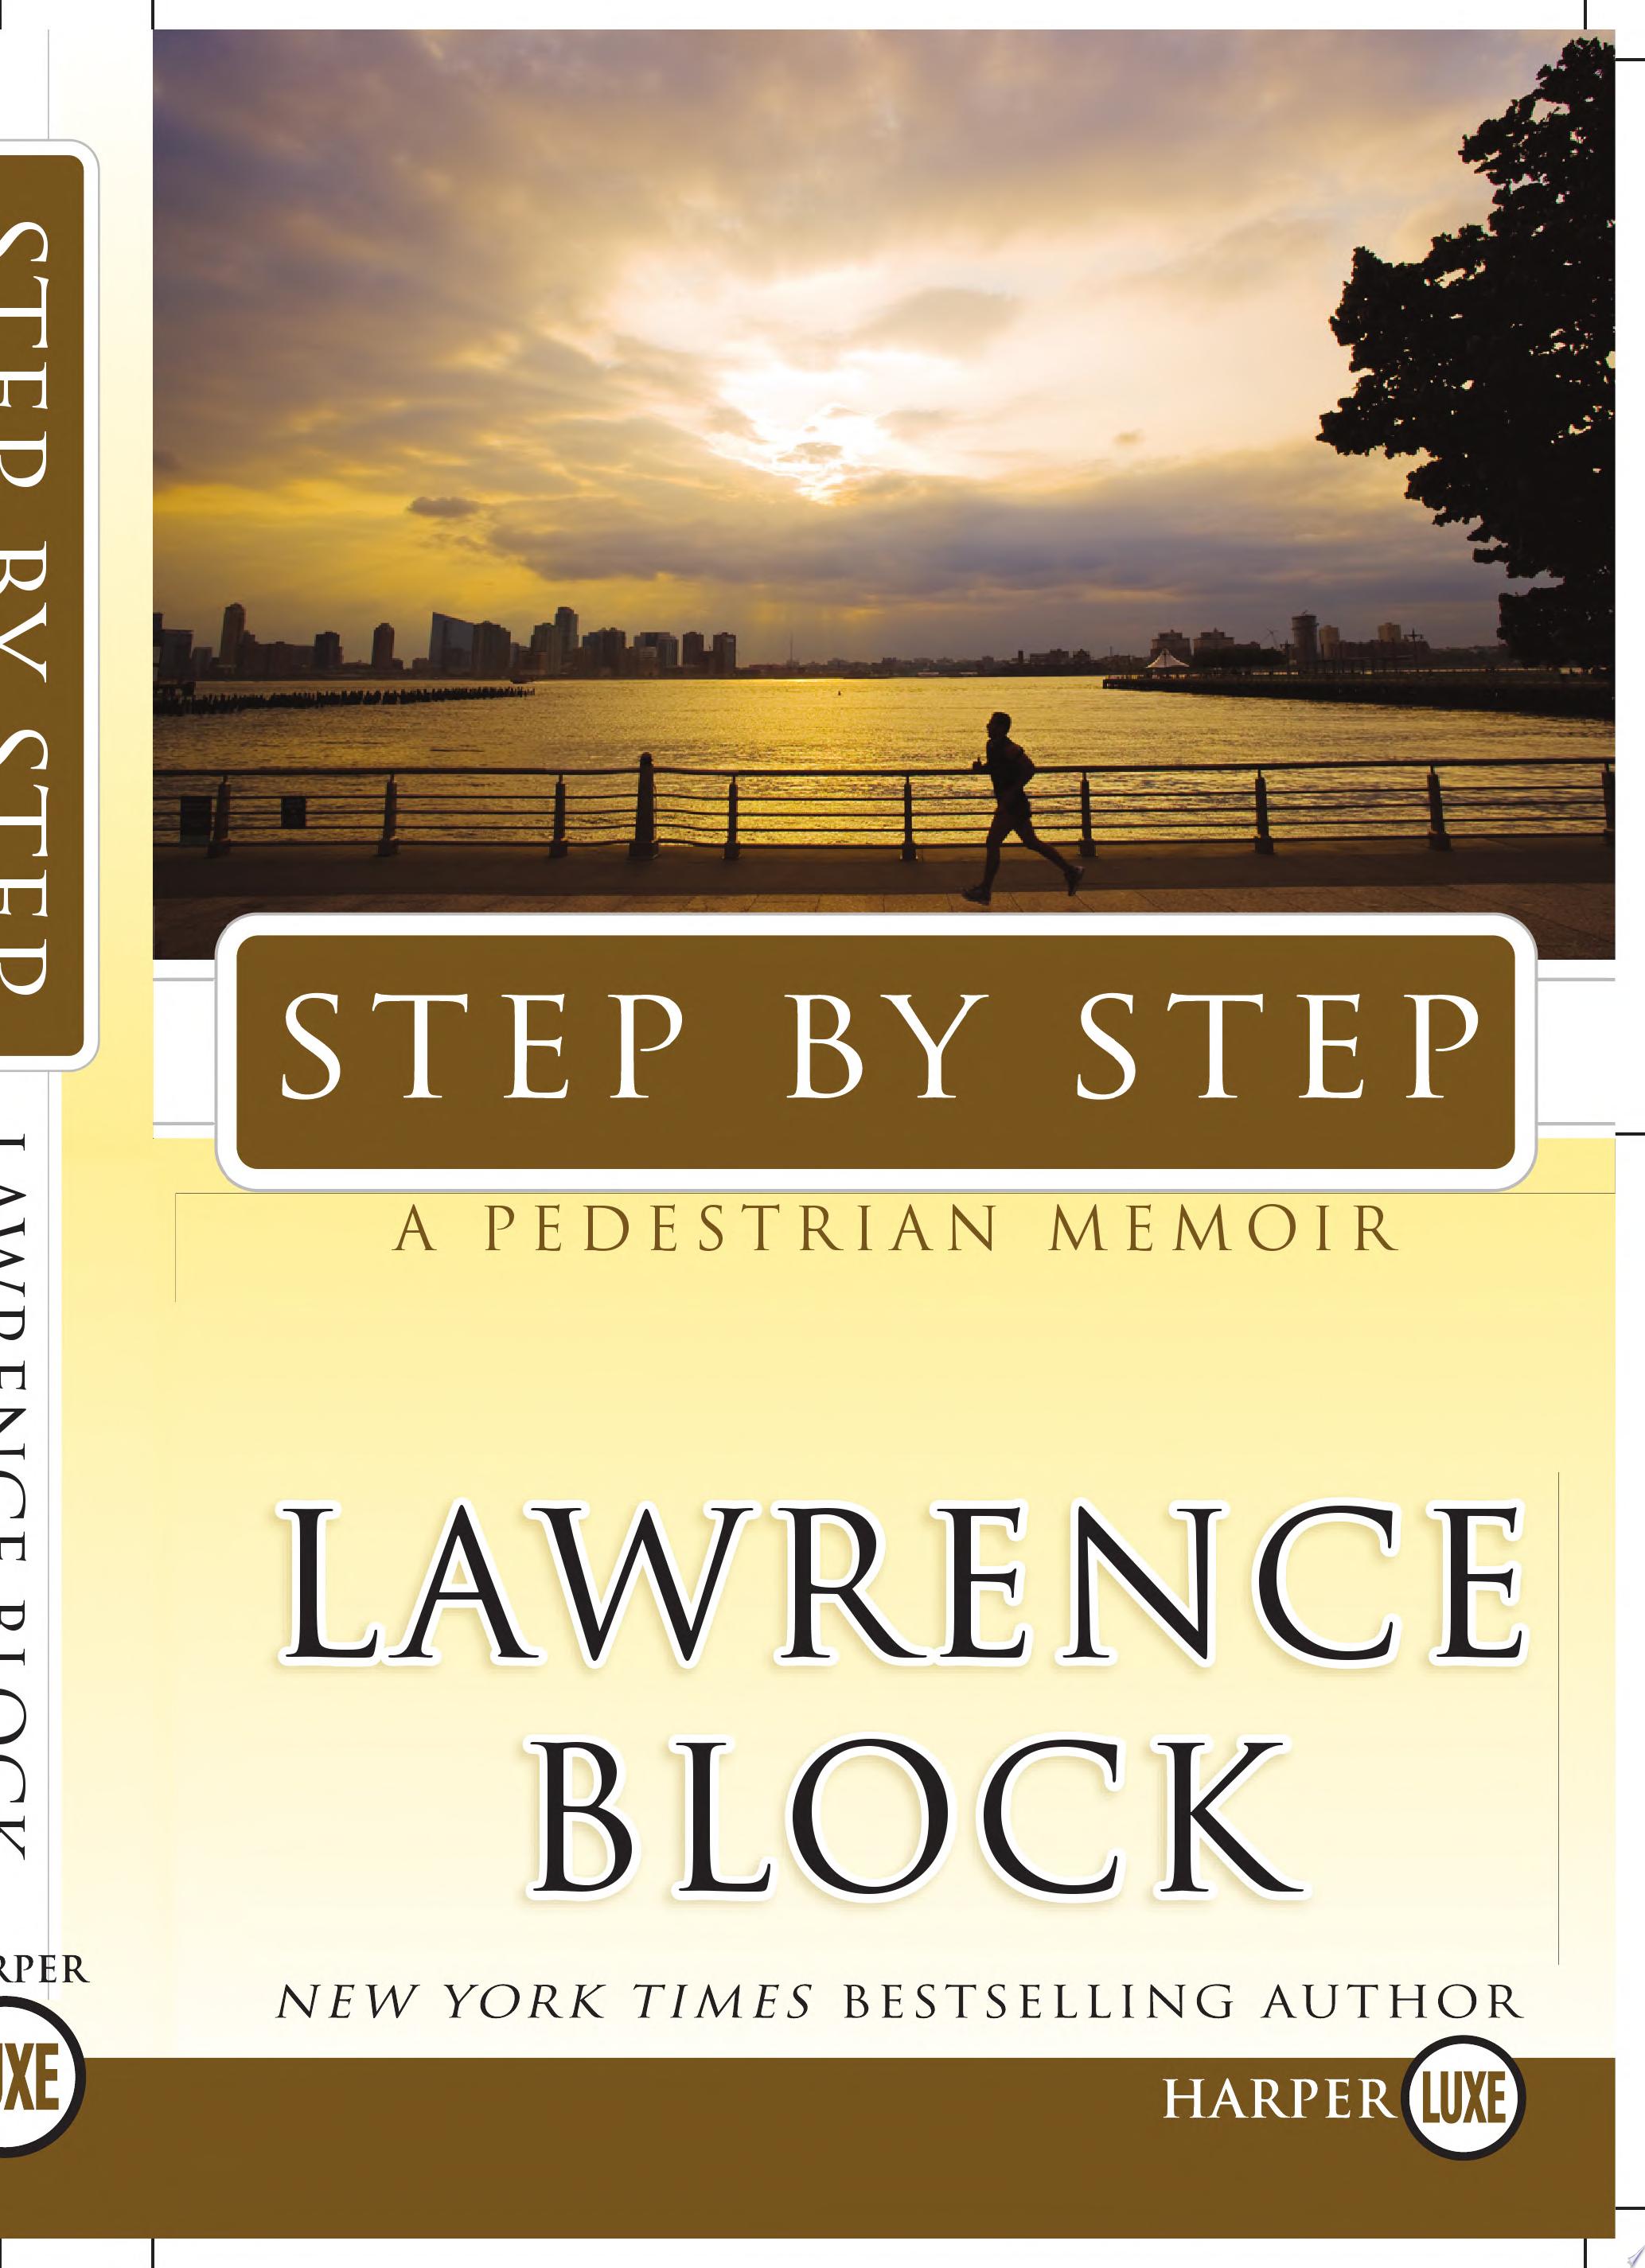 Image for "Step by Step LP"